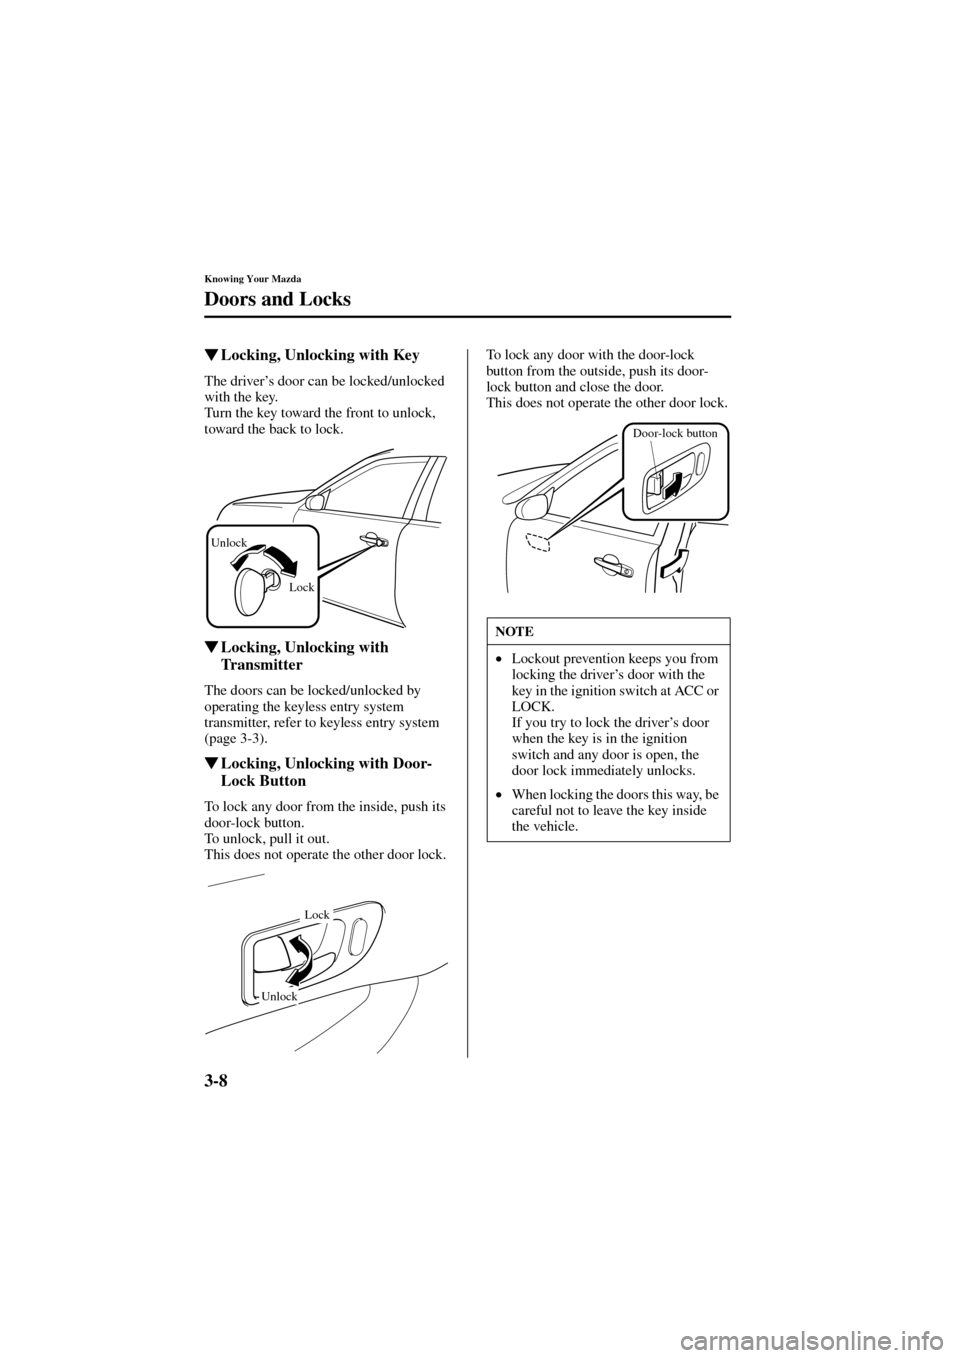 MAZDA MODEL 6 2004   (in English) User Guide 3-8
Knowing Your Mazda
Doors and Locks
Form No. 8R29-EA-02I
Locking, Unlocking with Key
The driver’s door can be locked/unlocked 
with the key.
Turn the key toward the front to unlock, 
toward the 